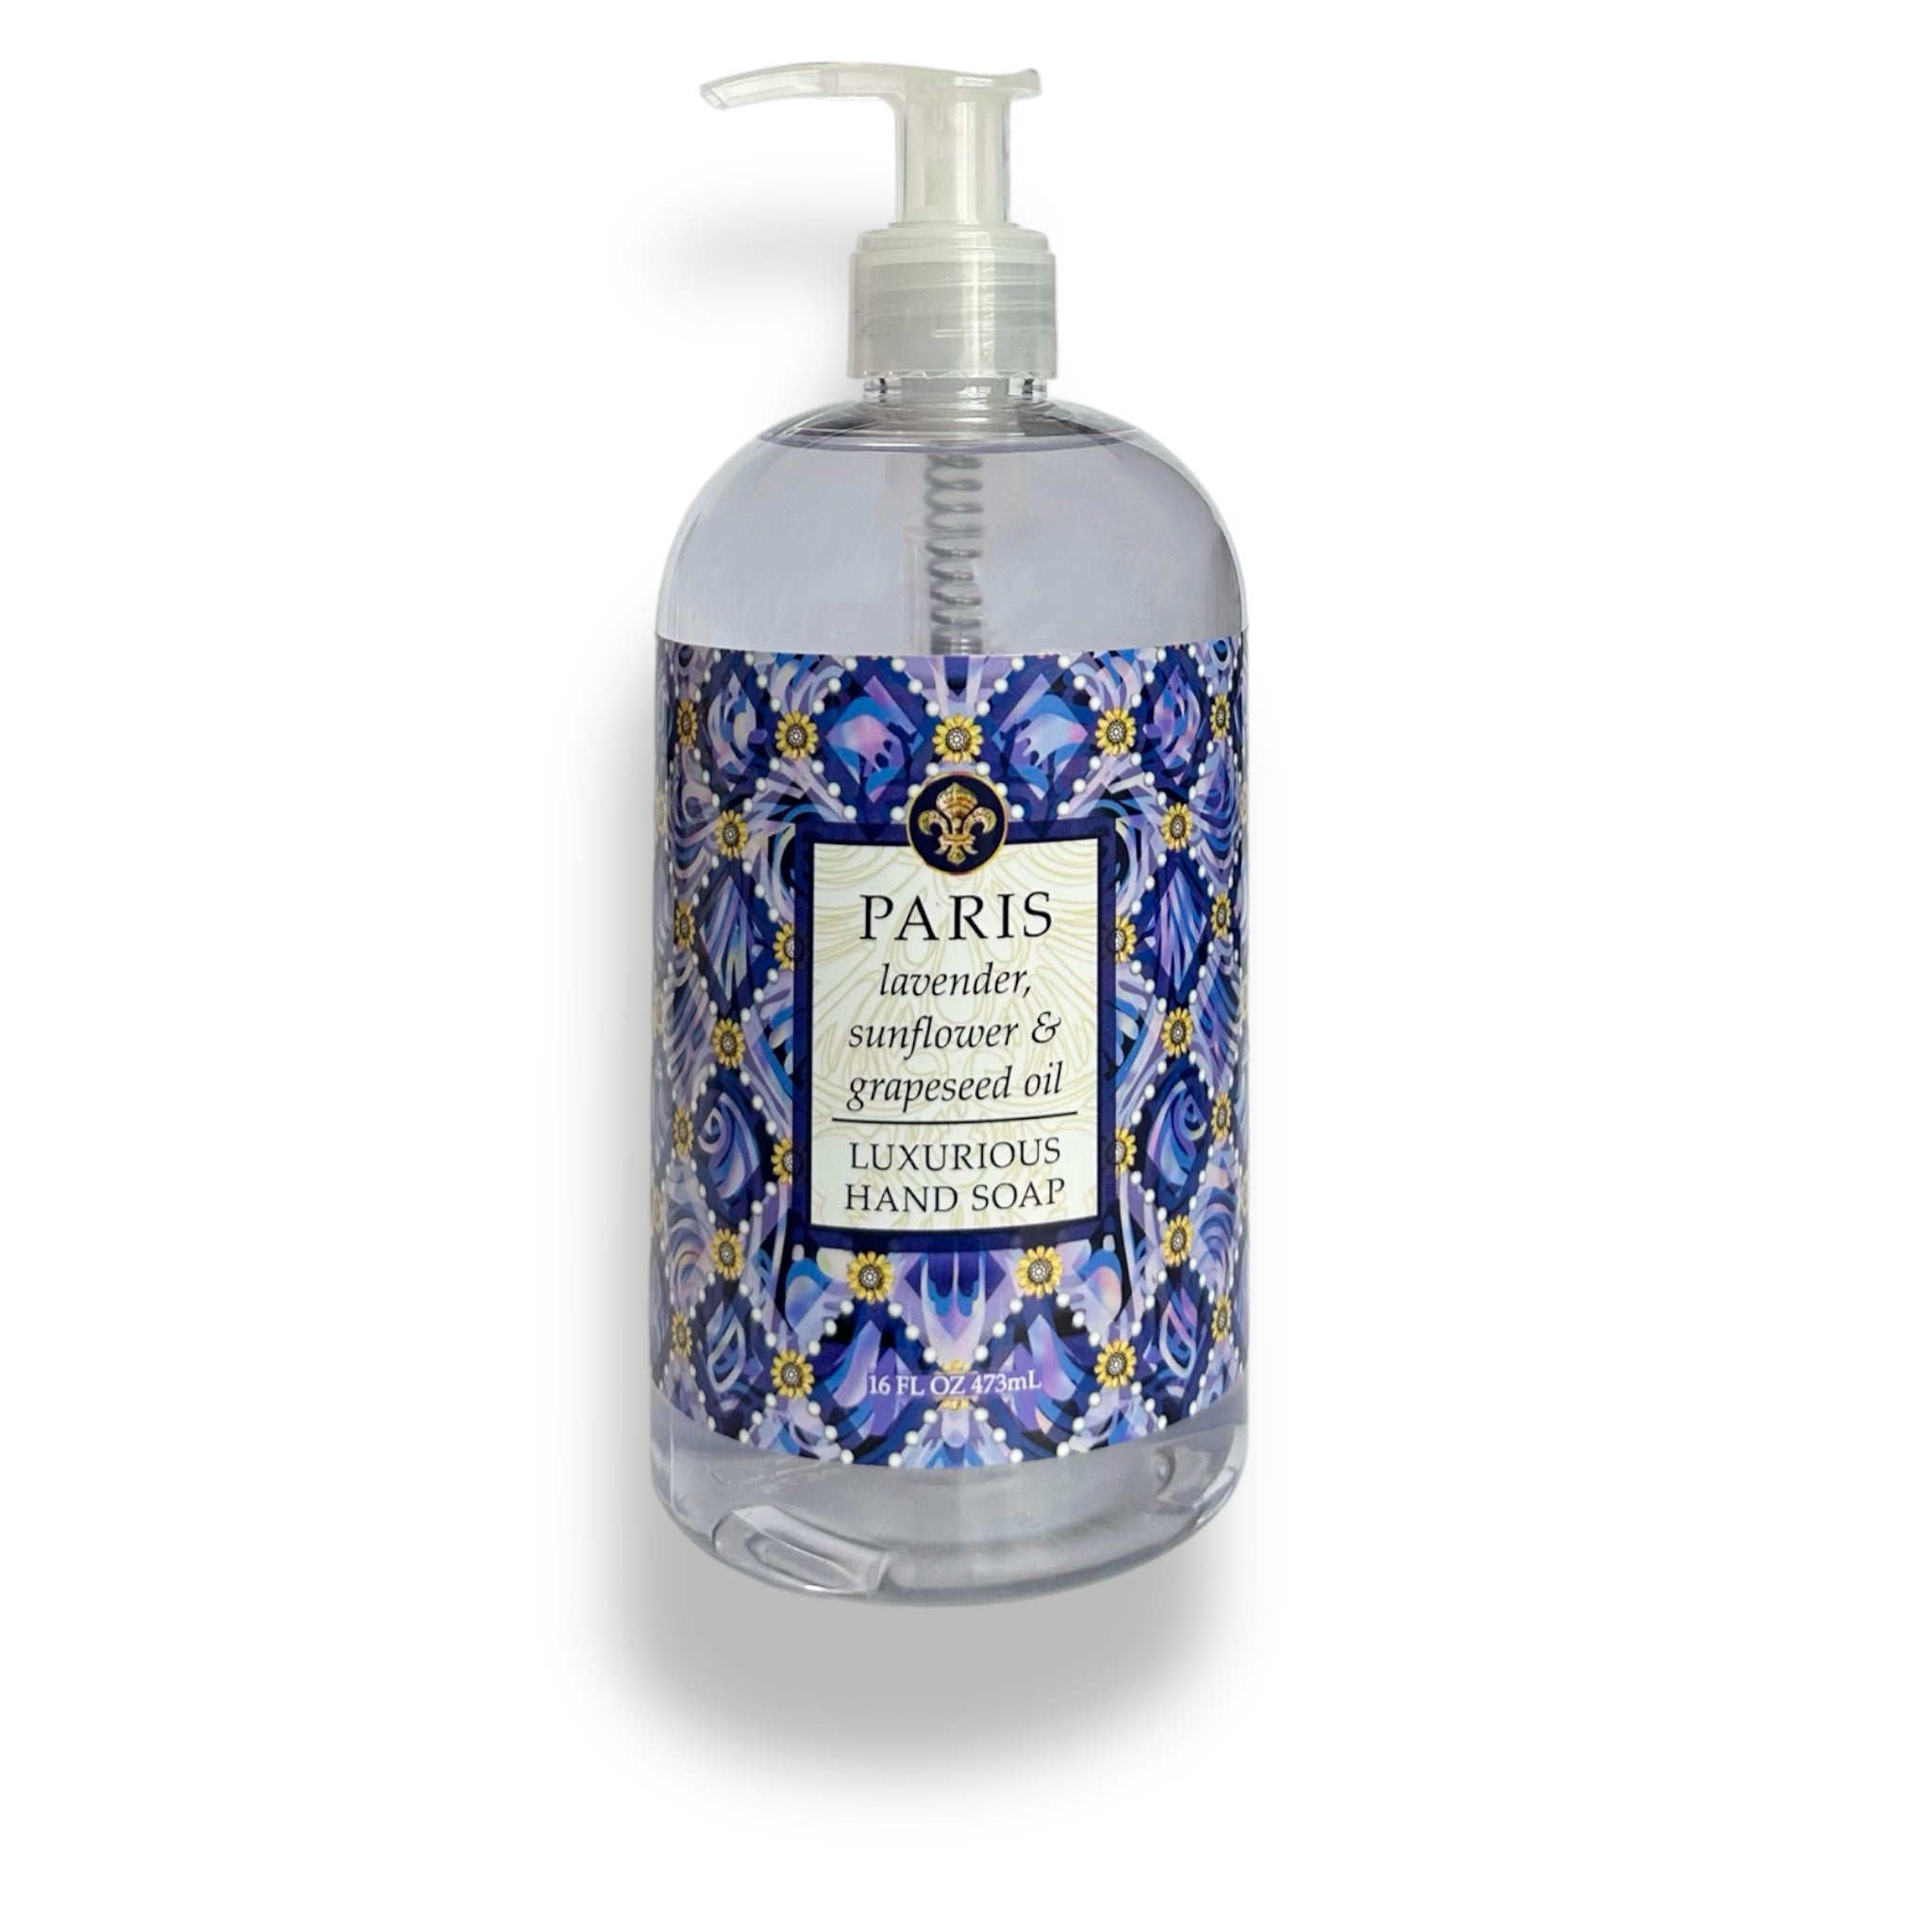 PARIS Lavender + Sunflower + Grapeseed Oil HAND SOAP Greenwich Bay Trading Company